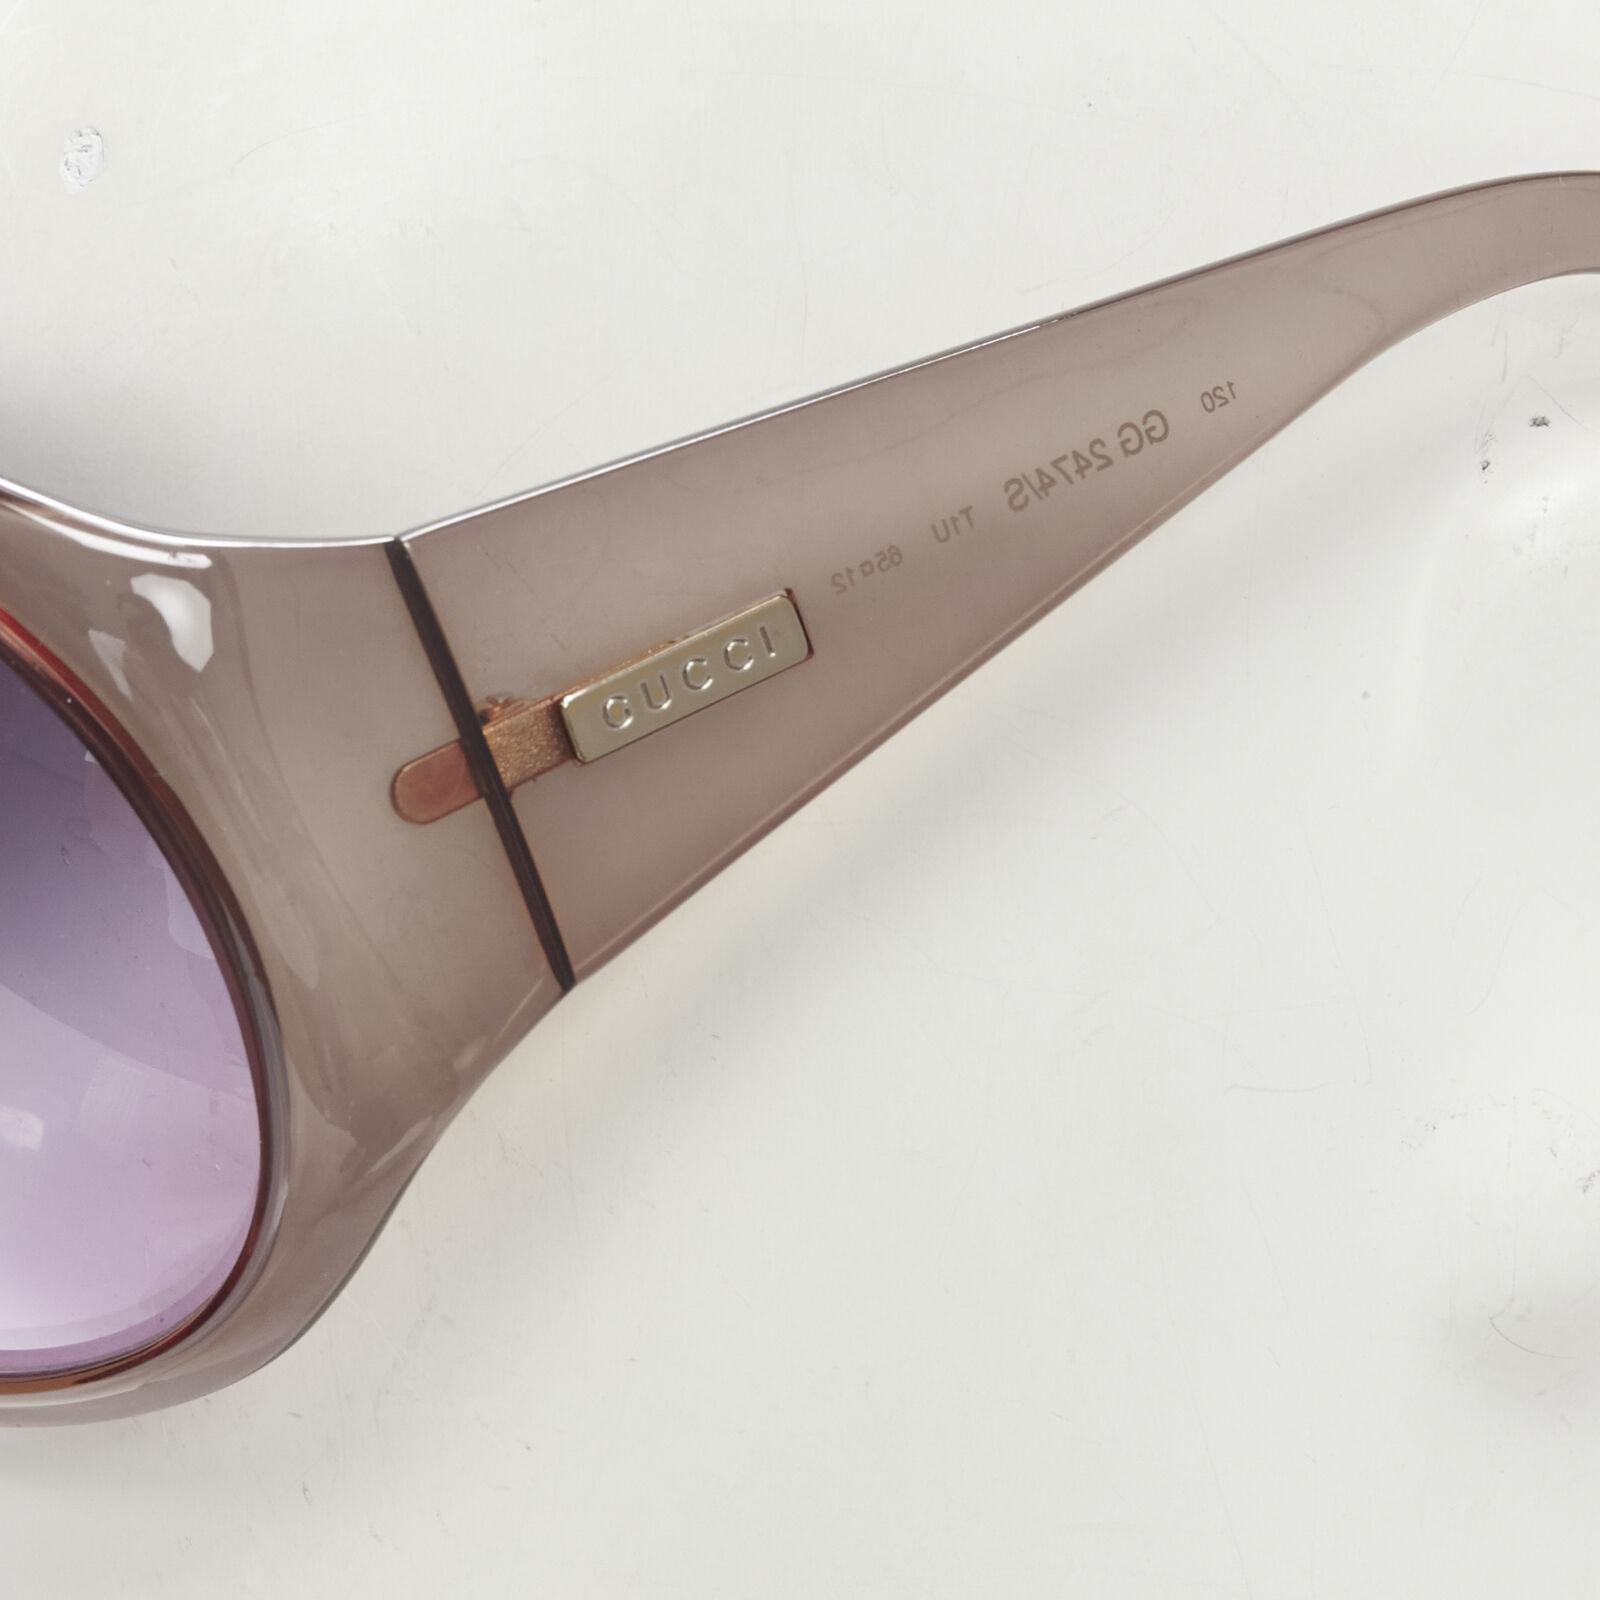 GUCCI Vintage Y2K GG2474/S T1U gold GG purple lens brown butterfly sunglasses
Reference: ANWU/A00850
Brand: Gucci
Model: GG2474/S T1U
Material: Plastic
Color: Brown, Purple
Pattern: Solid
Made in: Italy

CONDITION:
Condition: Excellent, this item